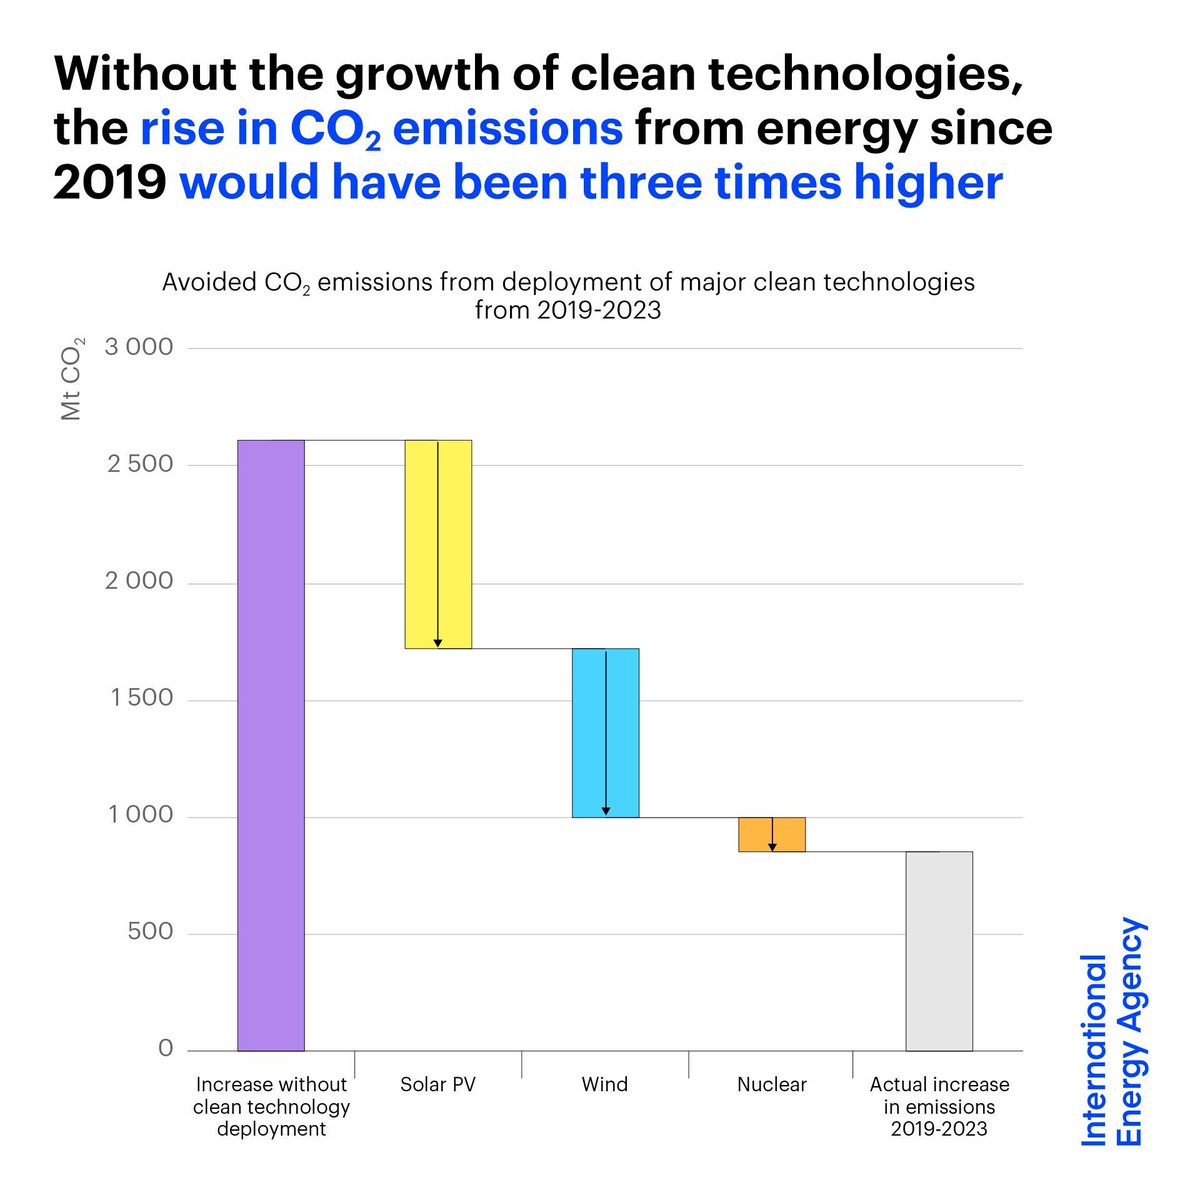 The growth of clean energy technologies – including solar, wind & nuclear power – in recent years is having a major impact on CO2 emissions Without them, the rise in emissions since 2019 would have been three times higher More in our new analysis 👉 iea.li/3VAQkzz